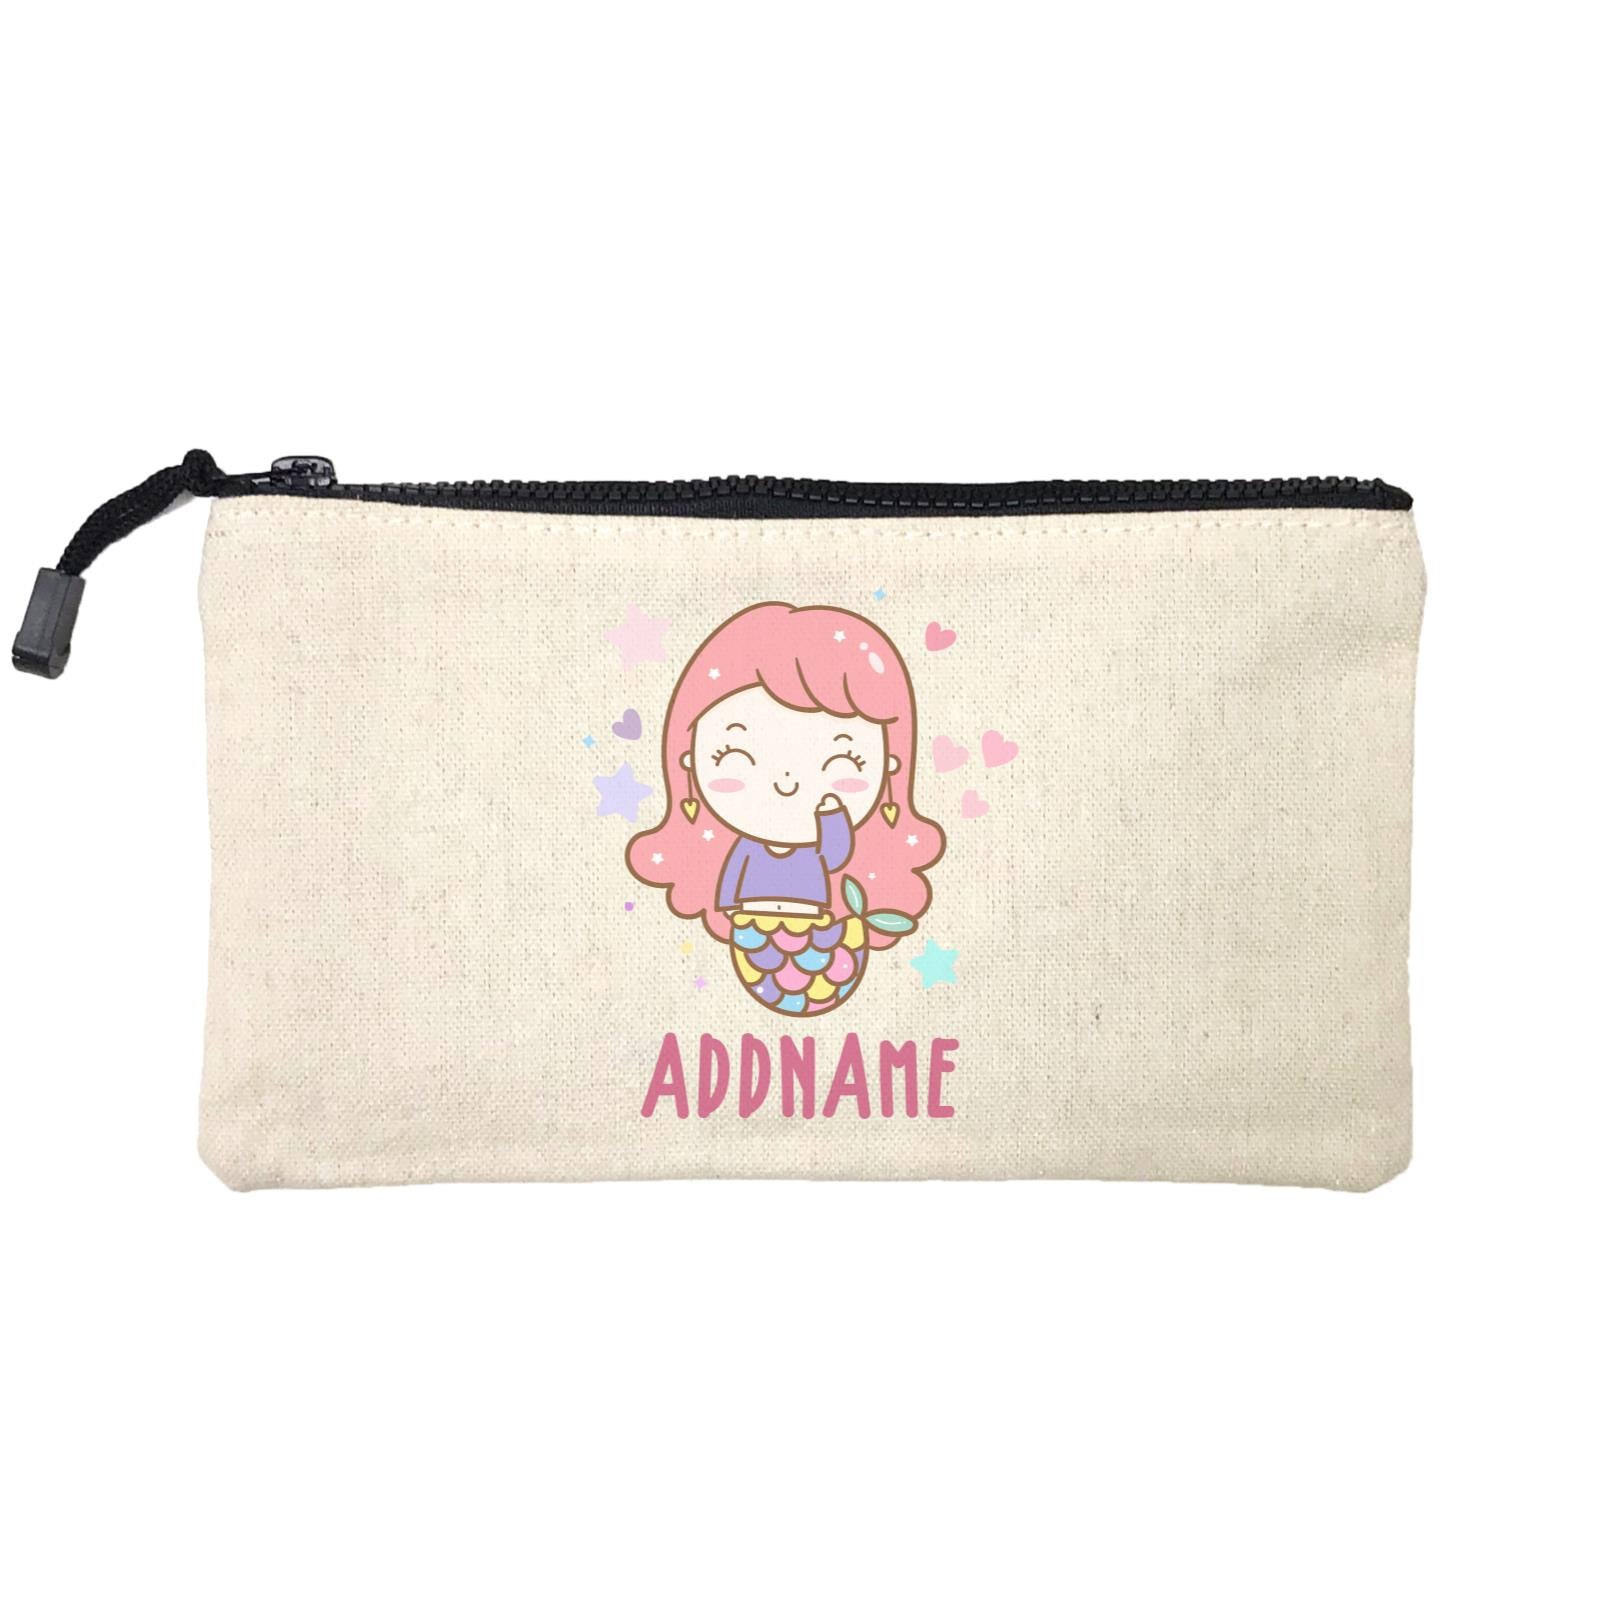 Unicorn And Princess Series Cute Happy Waving Mermaid Girl Addname Mini Accessories Stationery Pouch